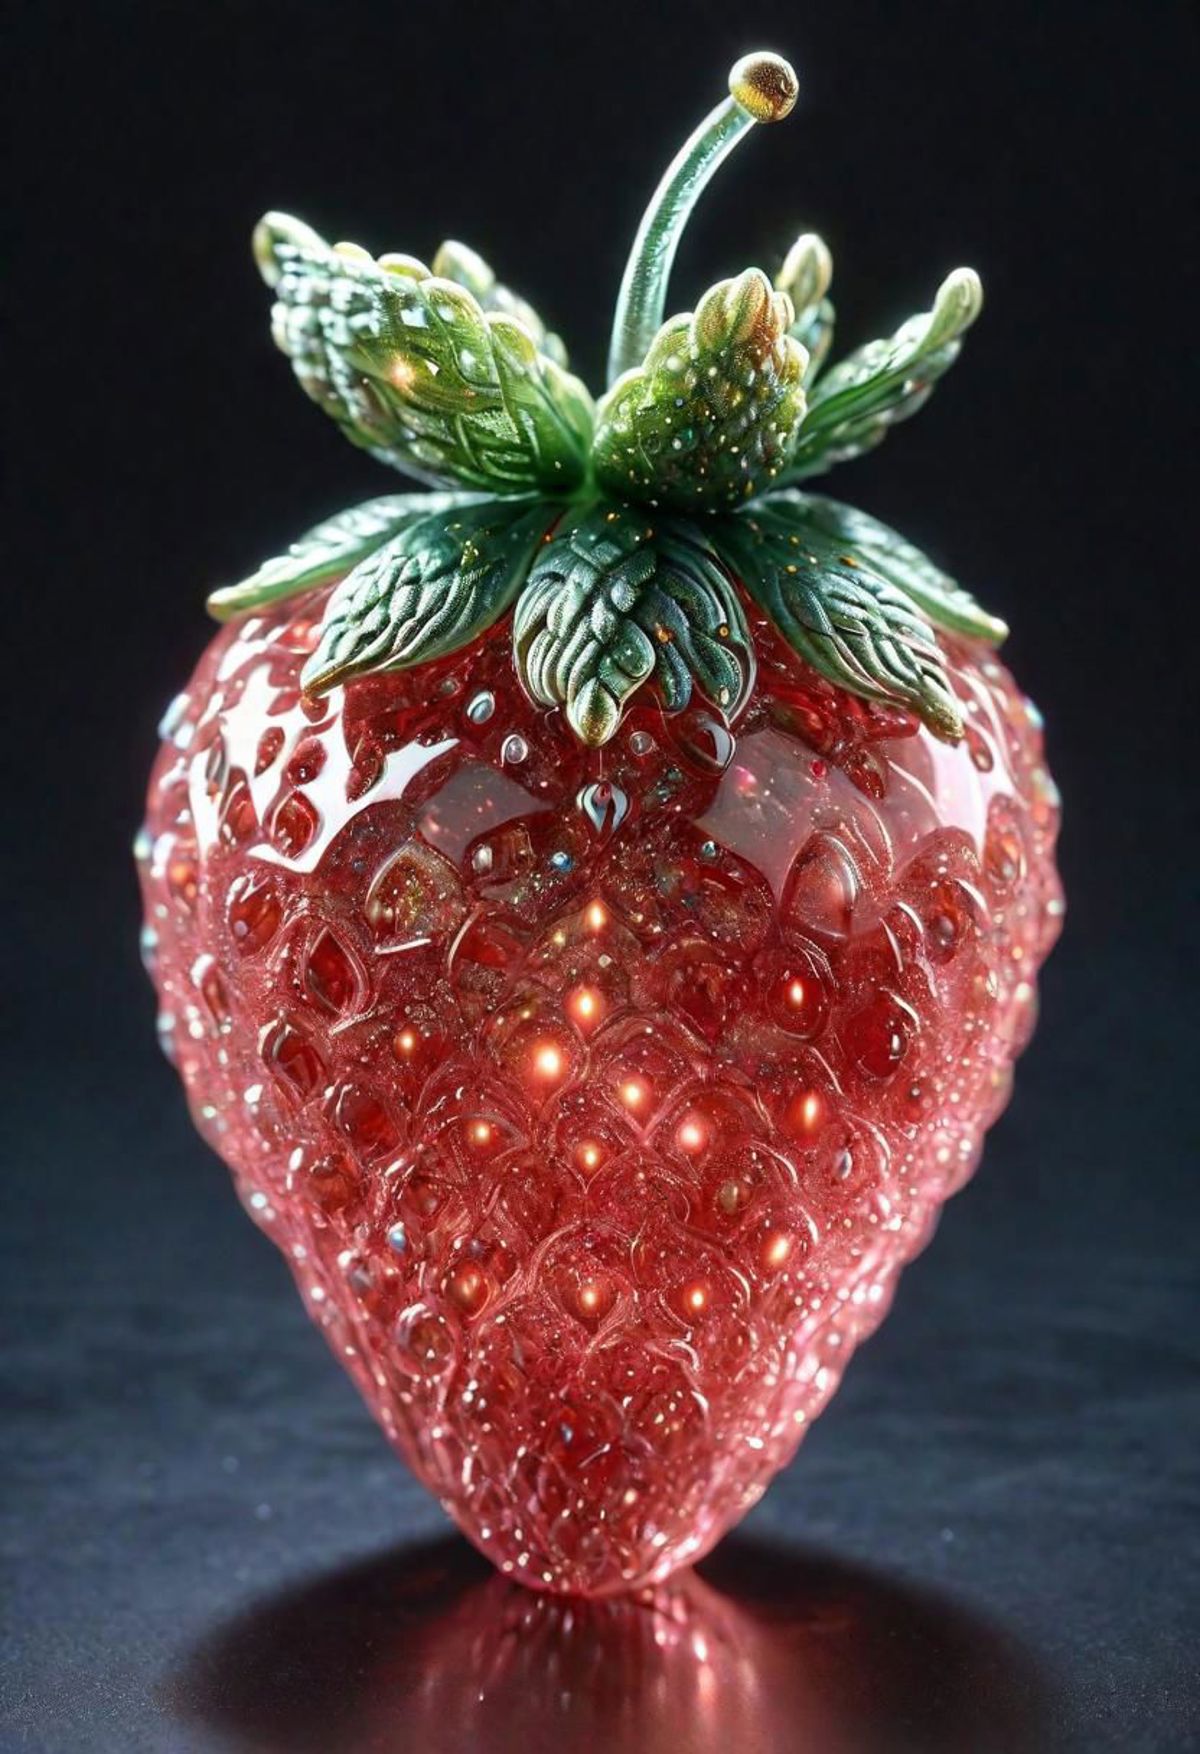 A red strawberry with green leaves and sparkling jewels.